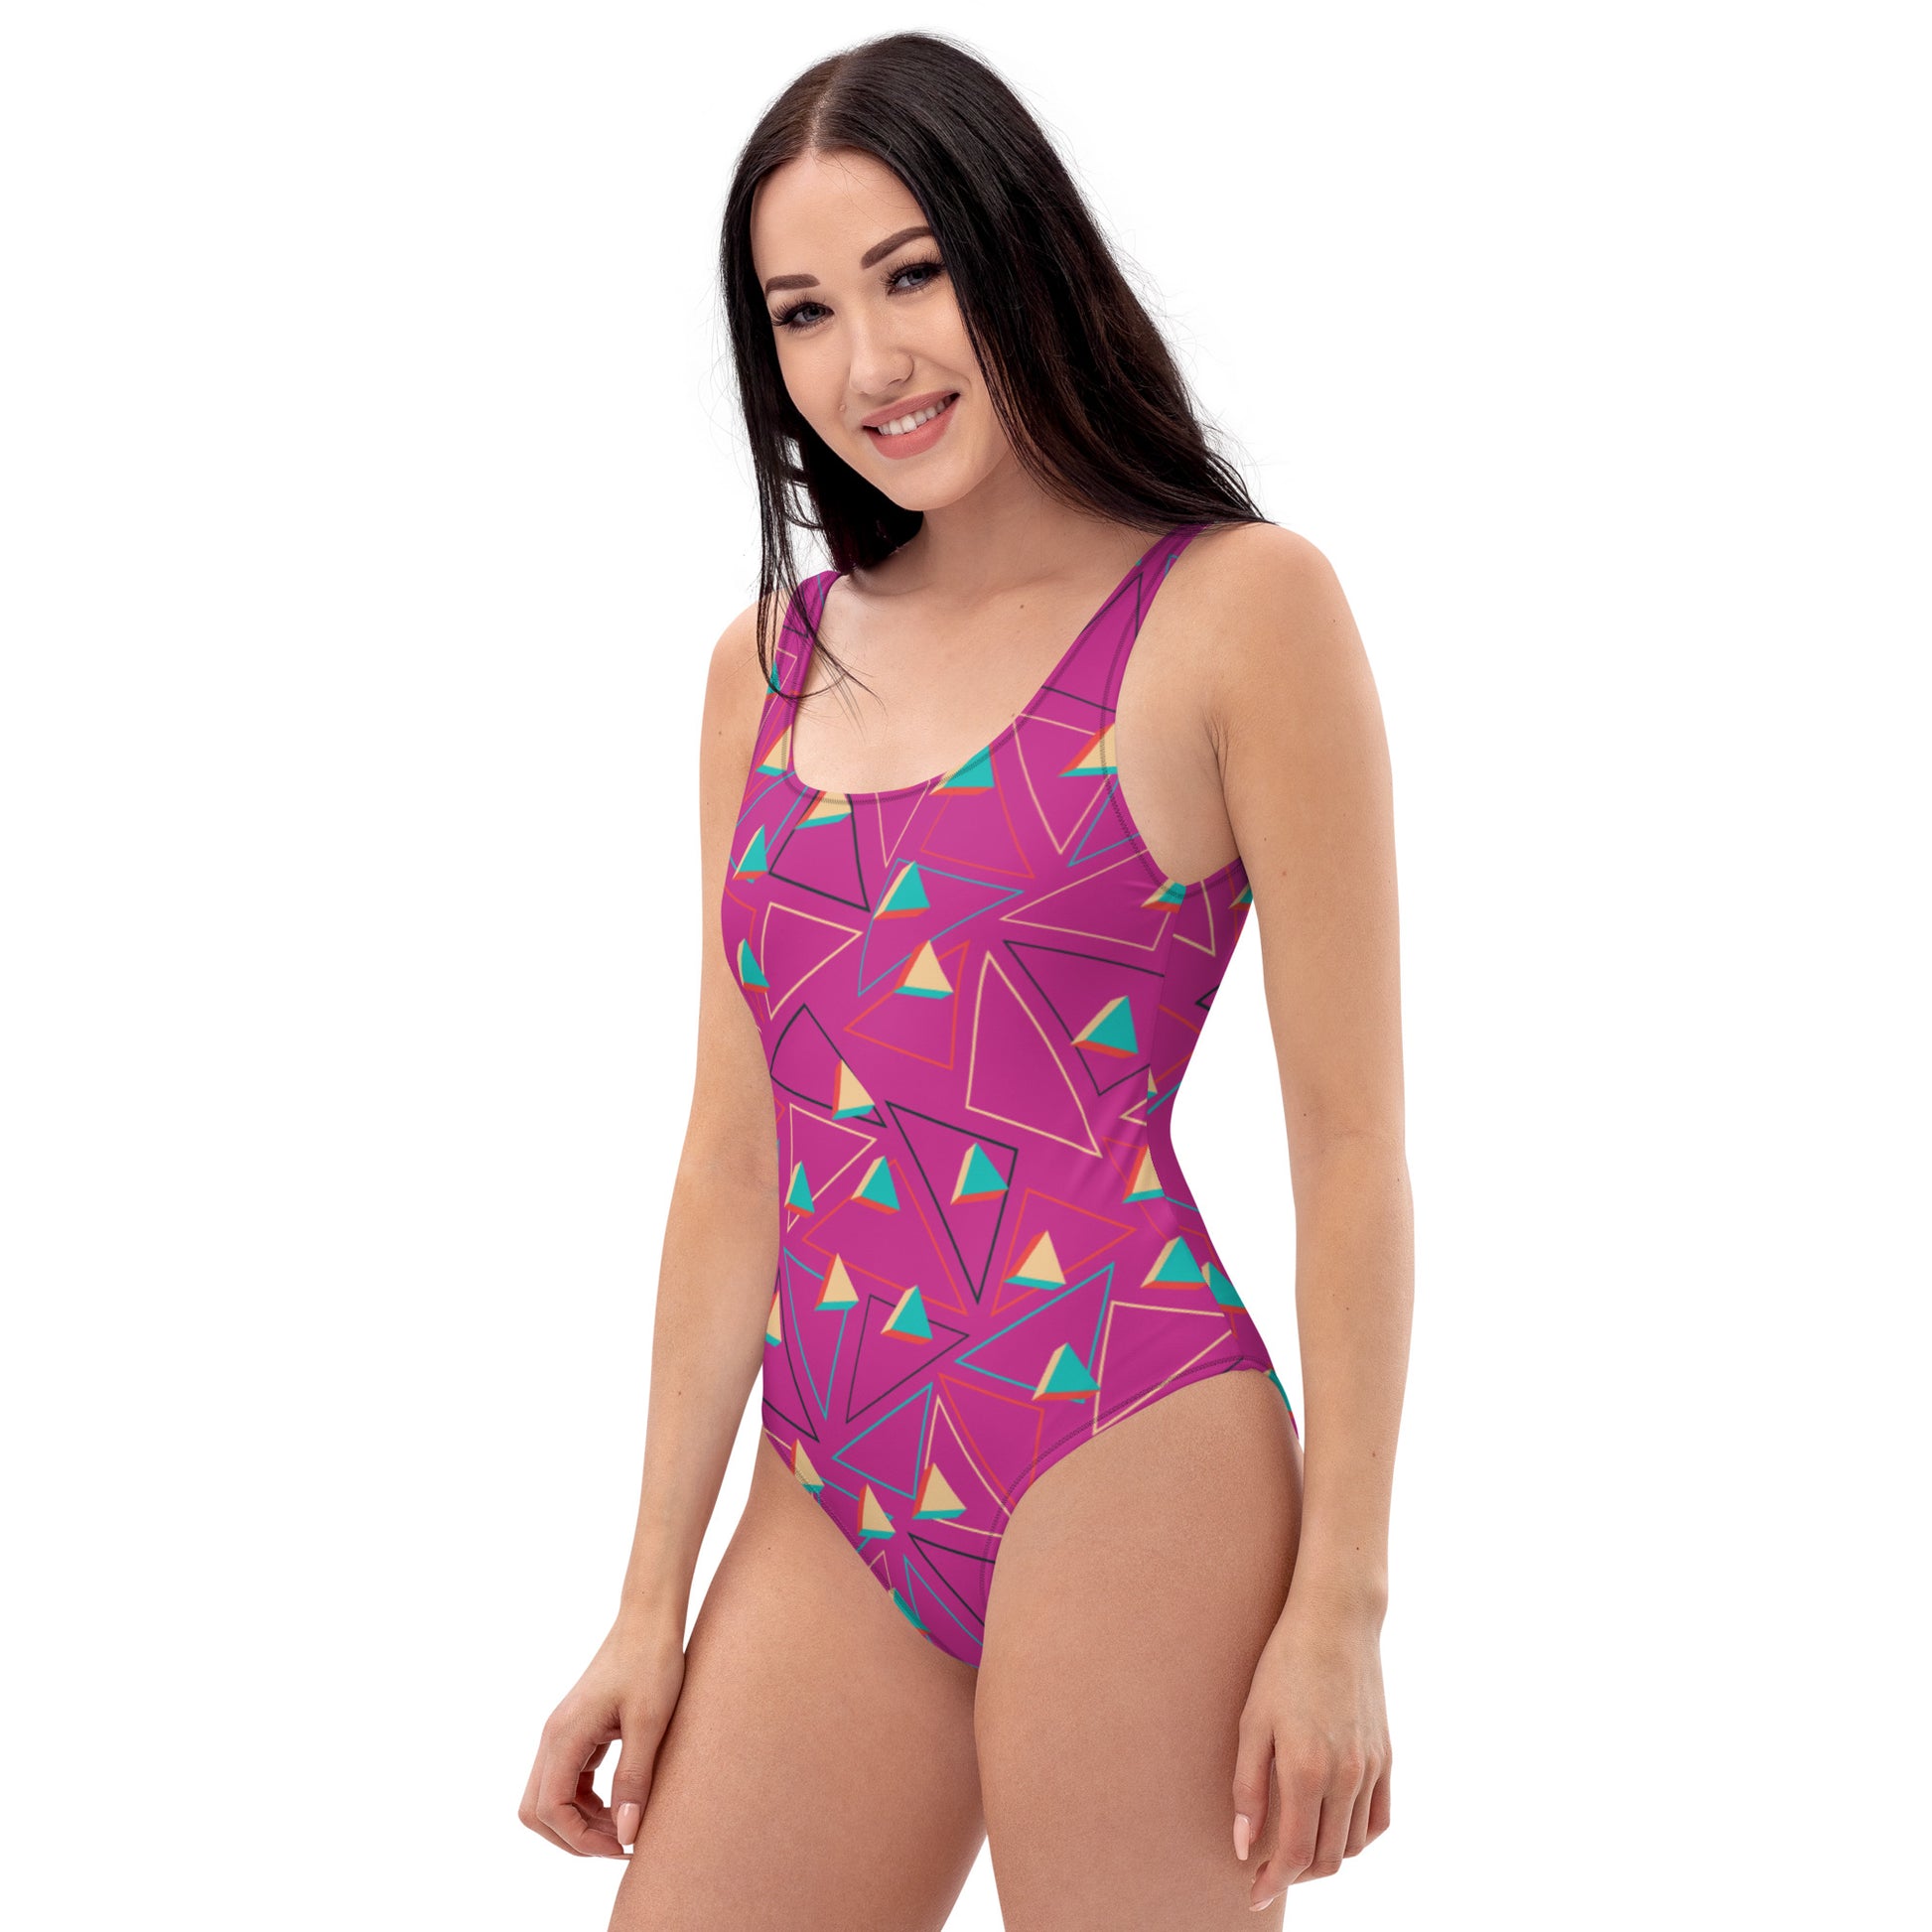 Triangular Candied Pink One-Piece Swimsuit TeeSpect